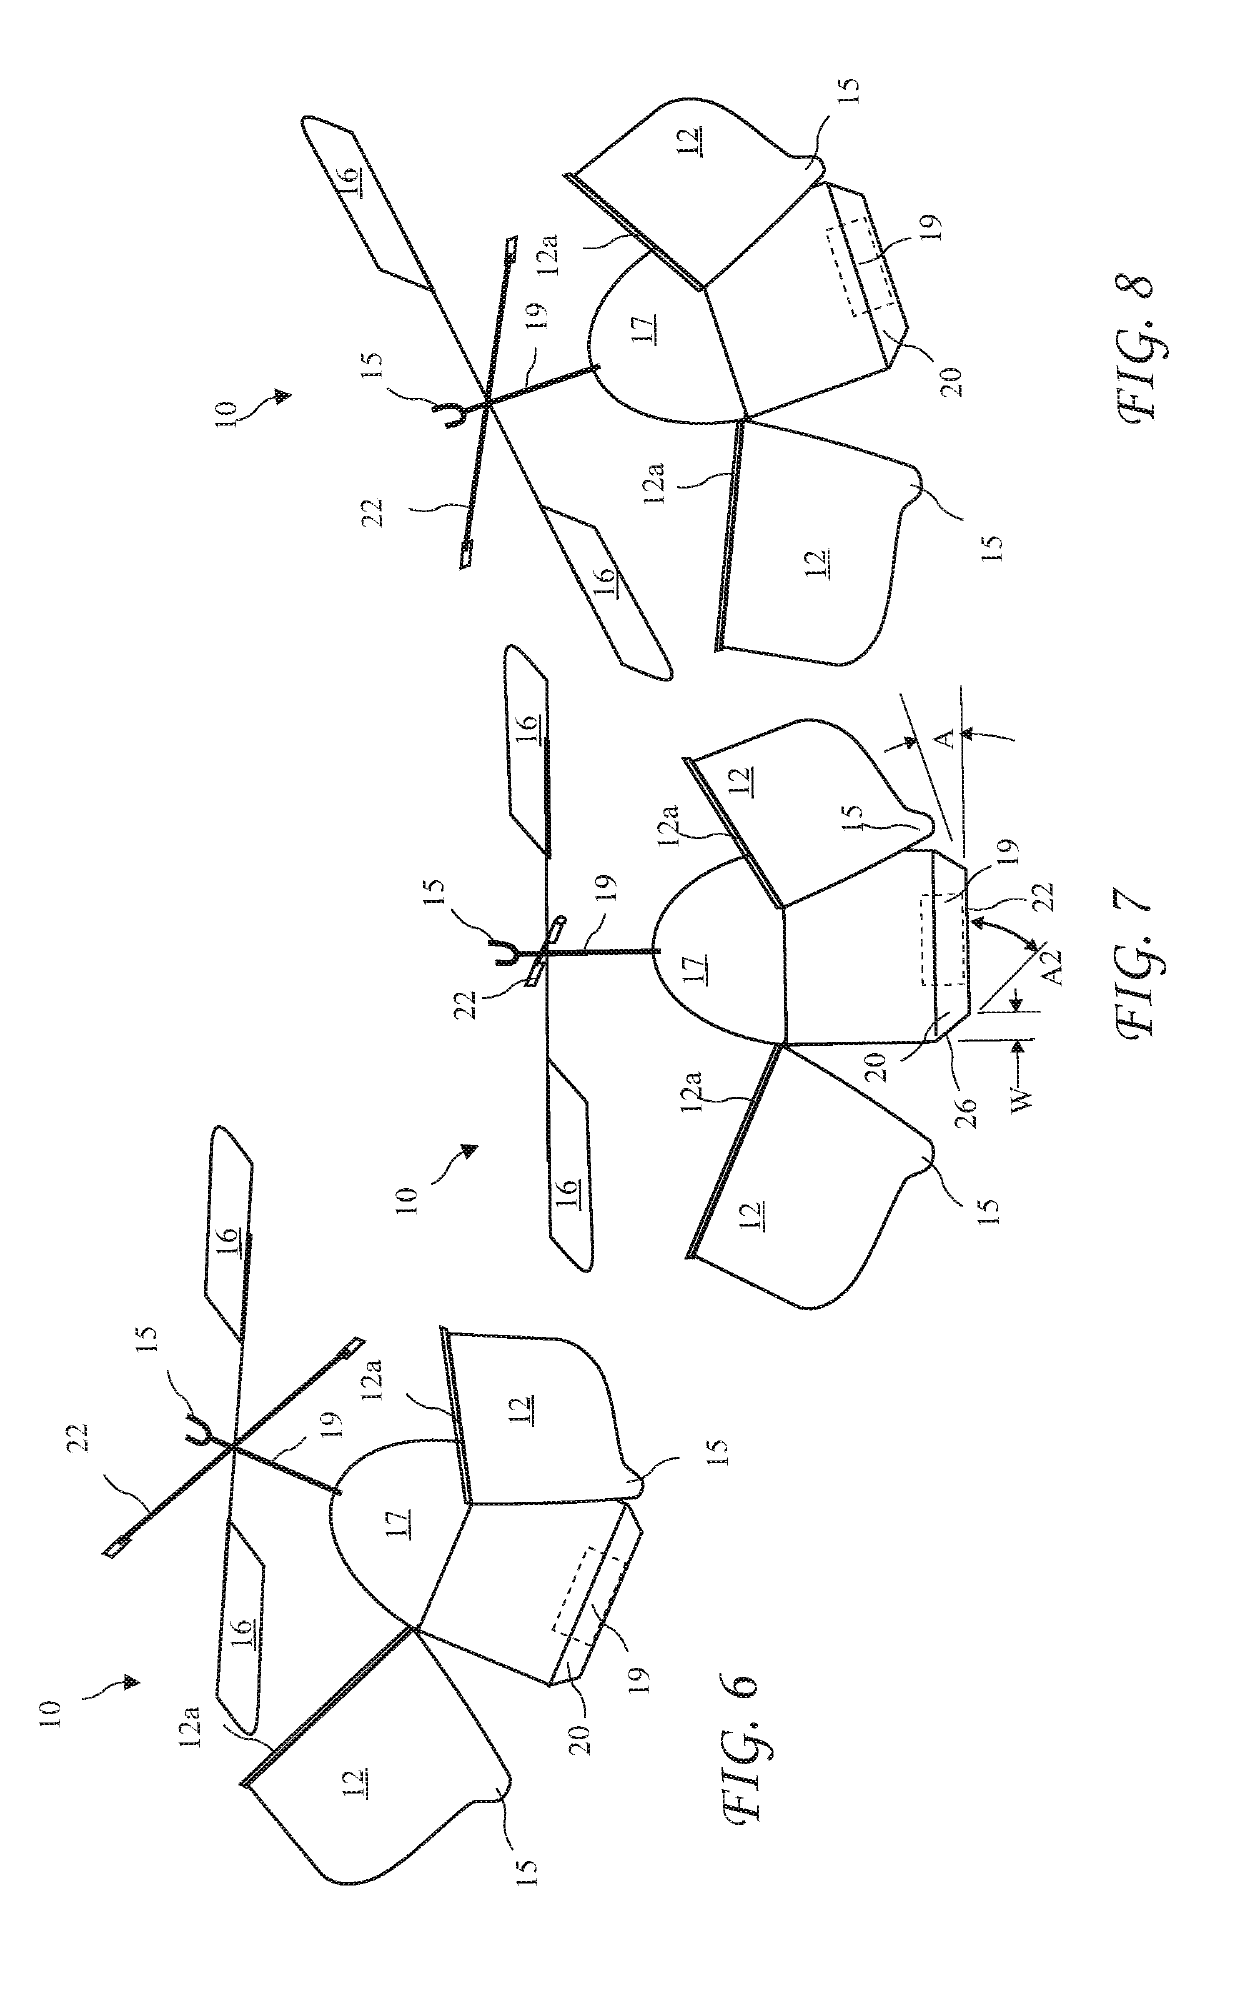 Self-righting remotely controlled object